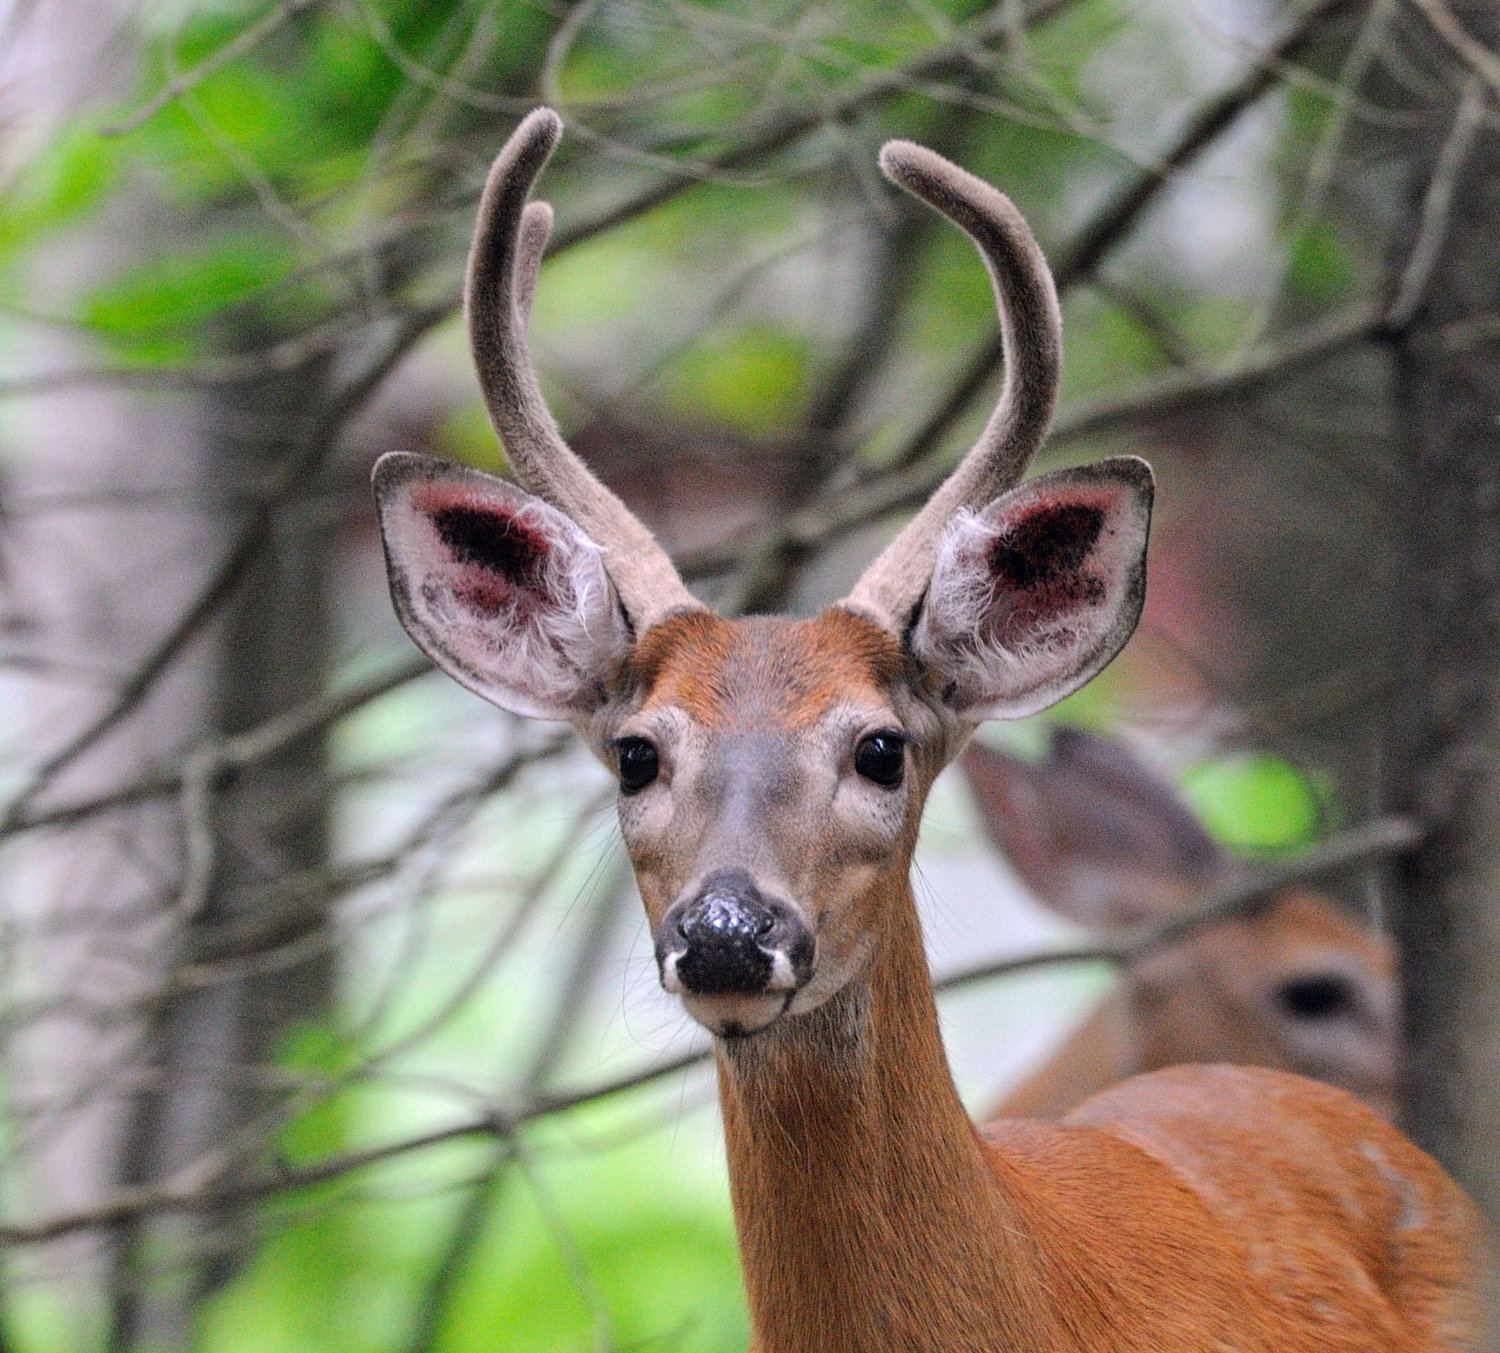 This is another male deer in summer displaying its summer coat. The reddish coat is thinner, allowing deer to better cope with summer heat. This image was captured in August; the antlers are well developed, though still velvet.